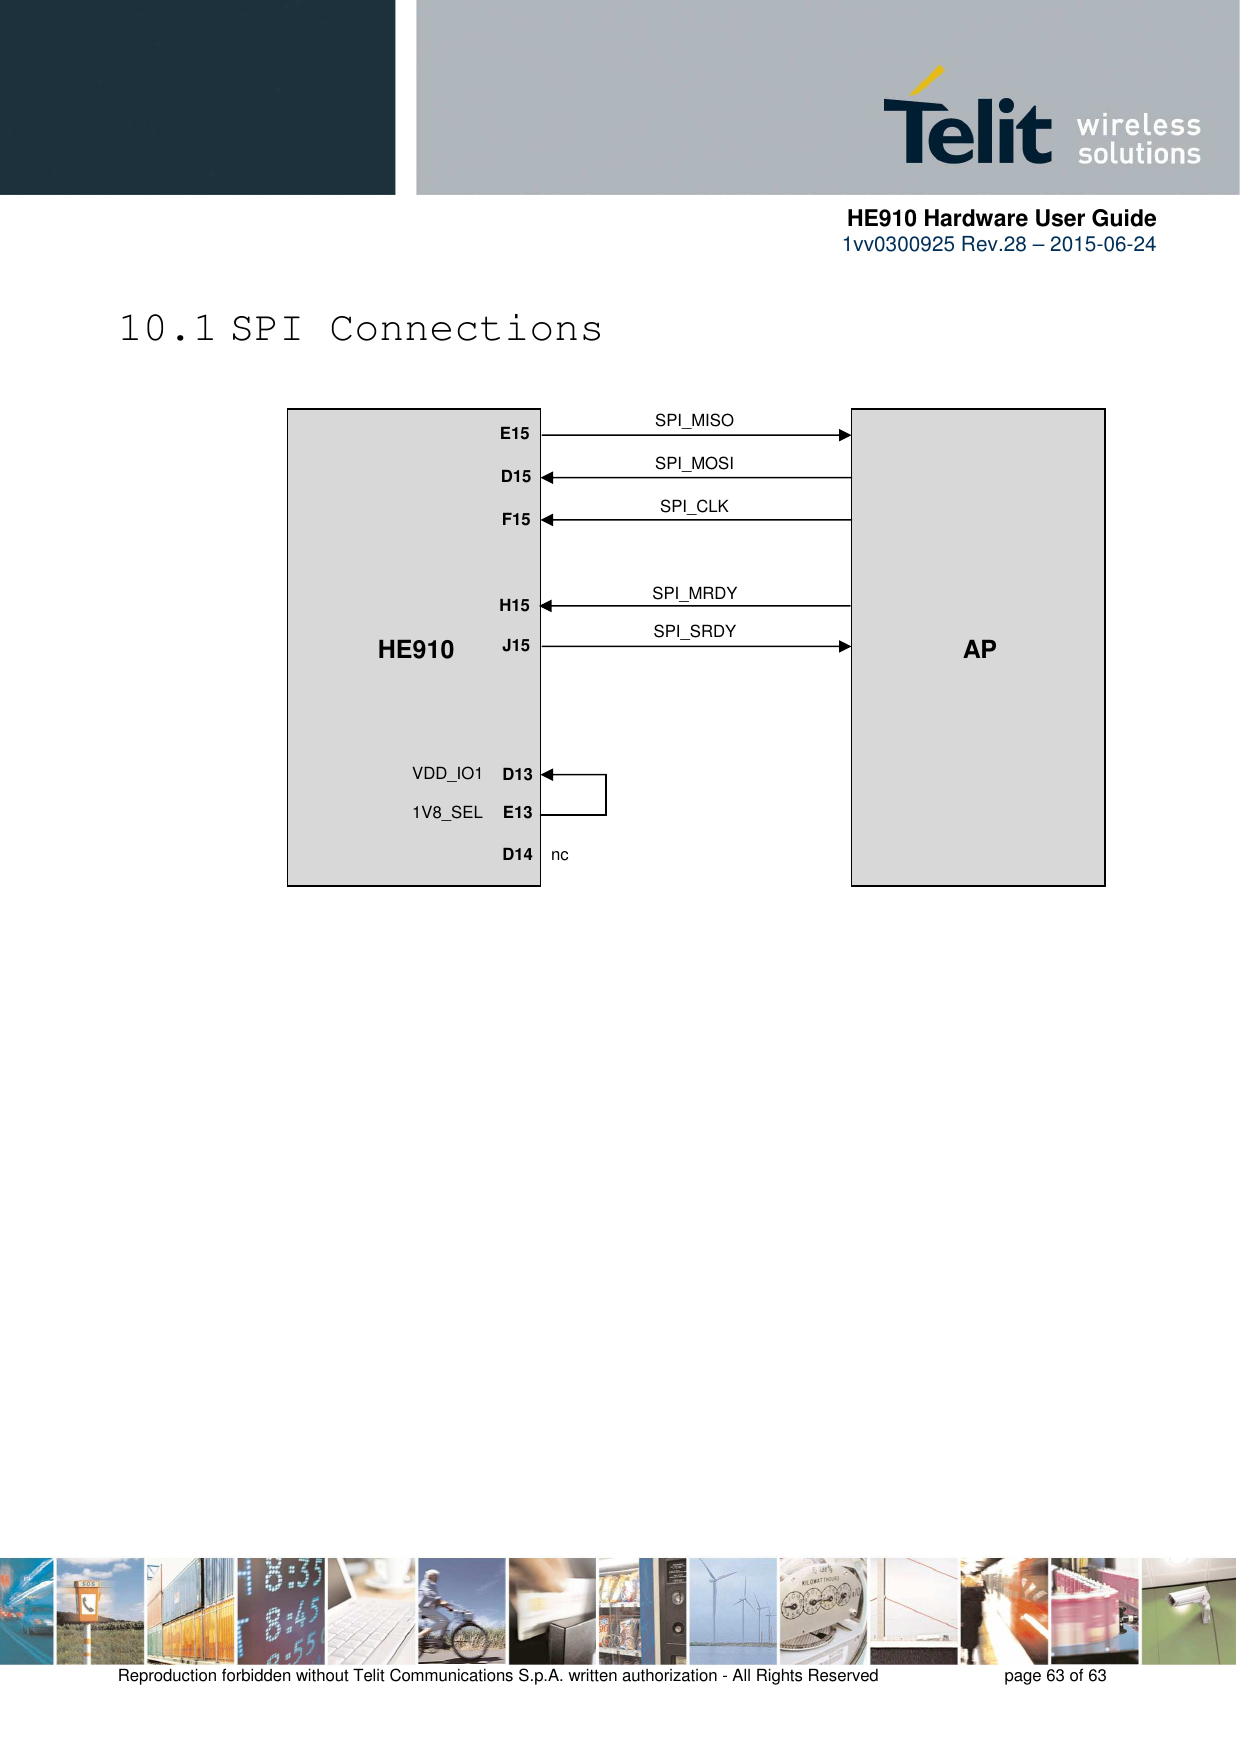      HE910 Hardware User Guide 1vv0300925 Rev.28 – 2015-06-24    Reproduction forbidden without Telit Communications S.p.A. written authorization - All Rights Reserved    page 63 of 63  10.1 SPI Connections                    SPI_MISO E15 D15 F15  H15 J15   D13 E13 D14 HE910            AP SPI_MOSI SPI_CLK SPI_MRDY SPI_SRDY VDD_IO1 1V8_SEL  nc  